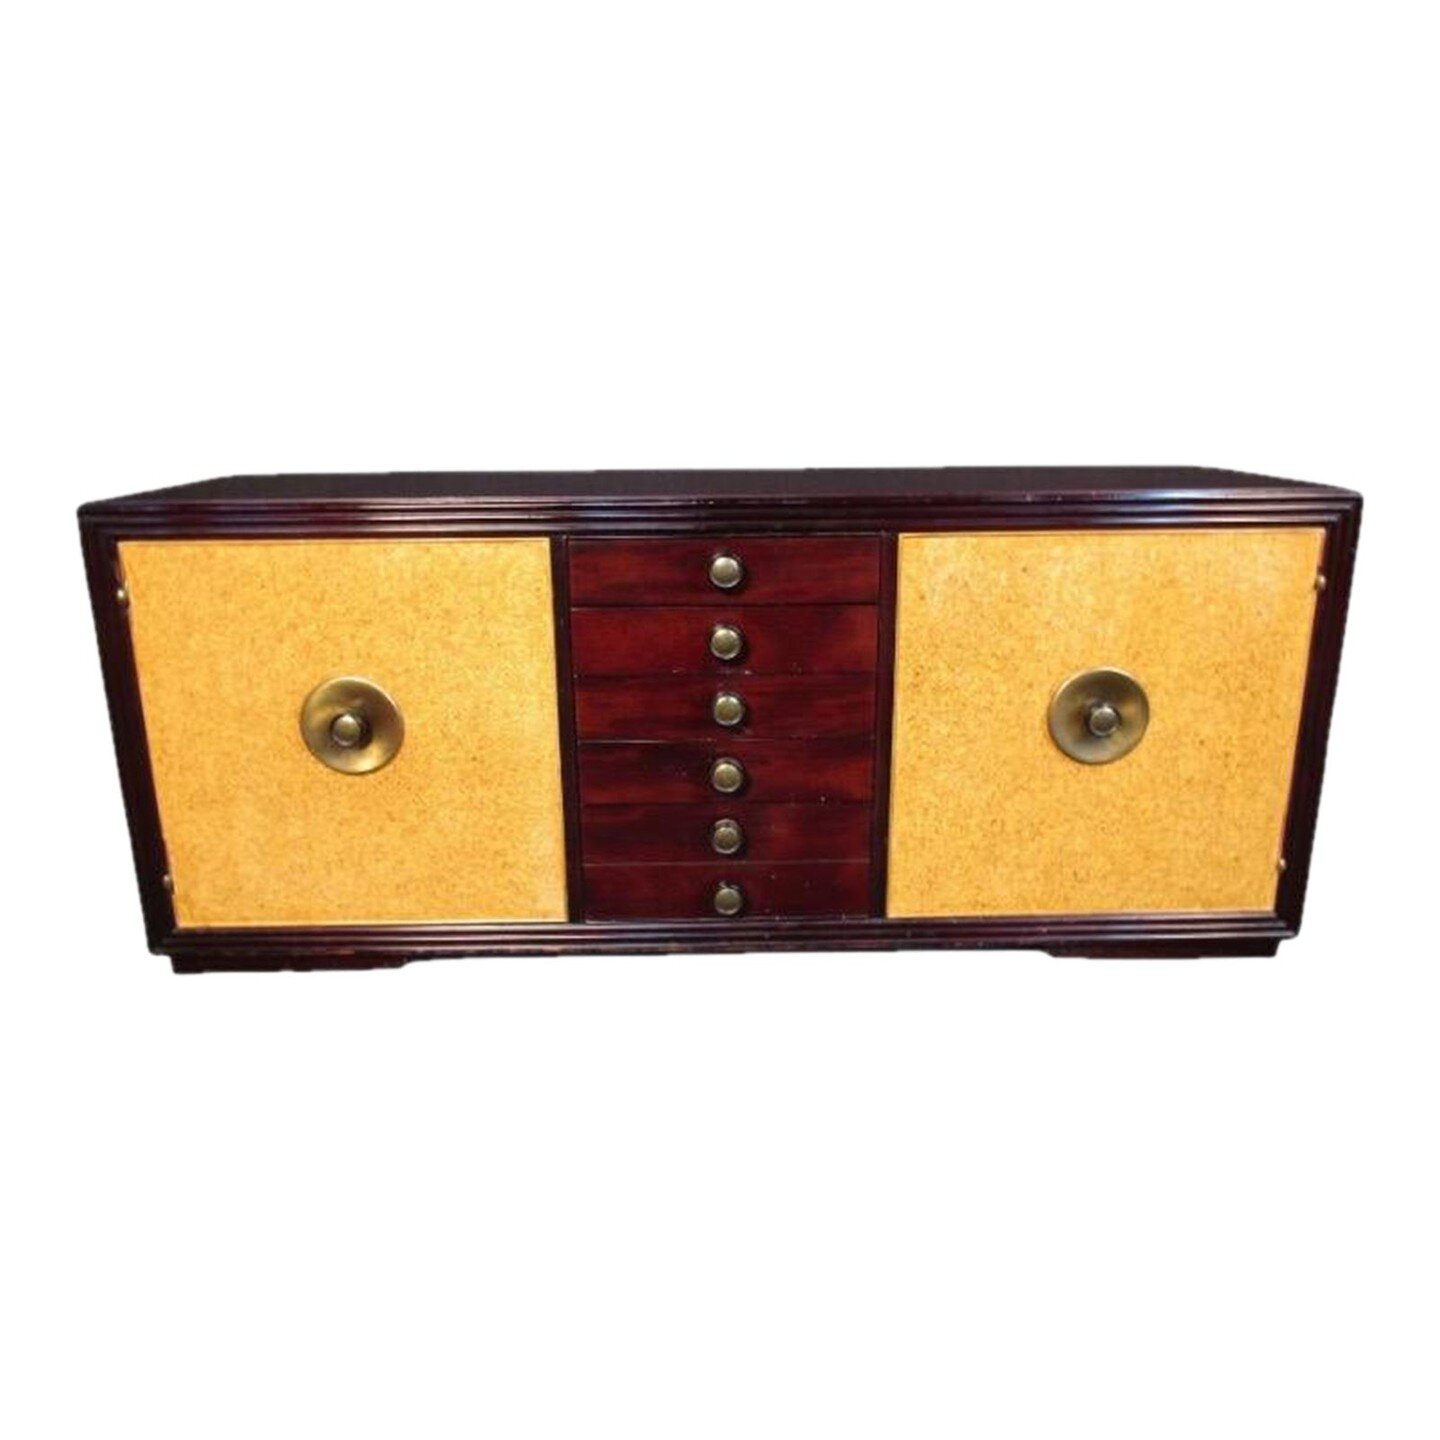 Mid Century Credenza in The Manner of Paul Frankl

Mid Century credenza in the Manner of Paul Frankl featuring mahogany veneer, cork laminated doors and brass hardware. inside the left door holds 4 dovetail jointed drawers, right door contains 2 shel